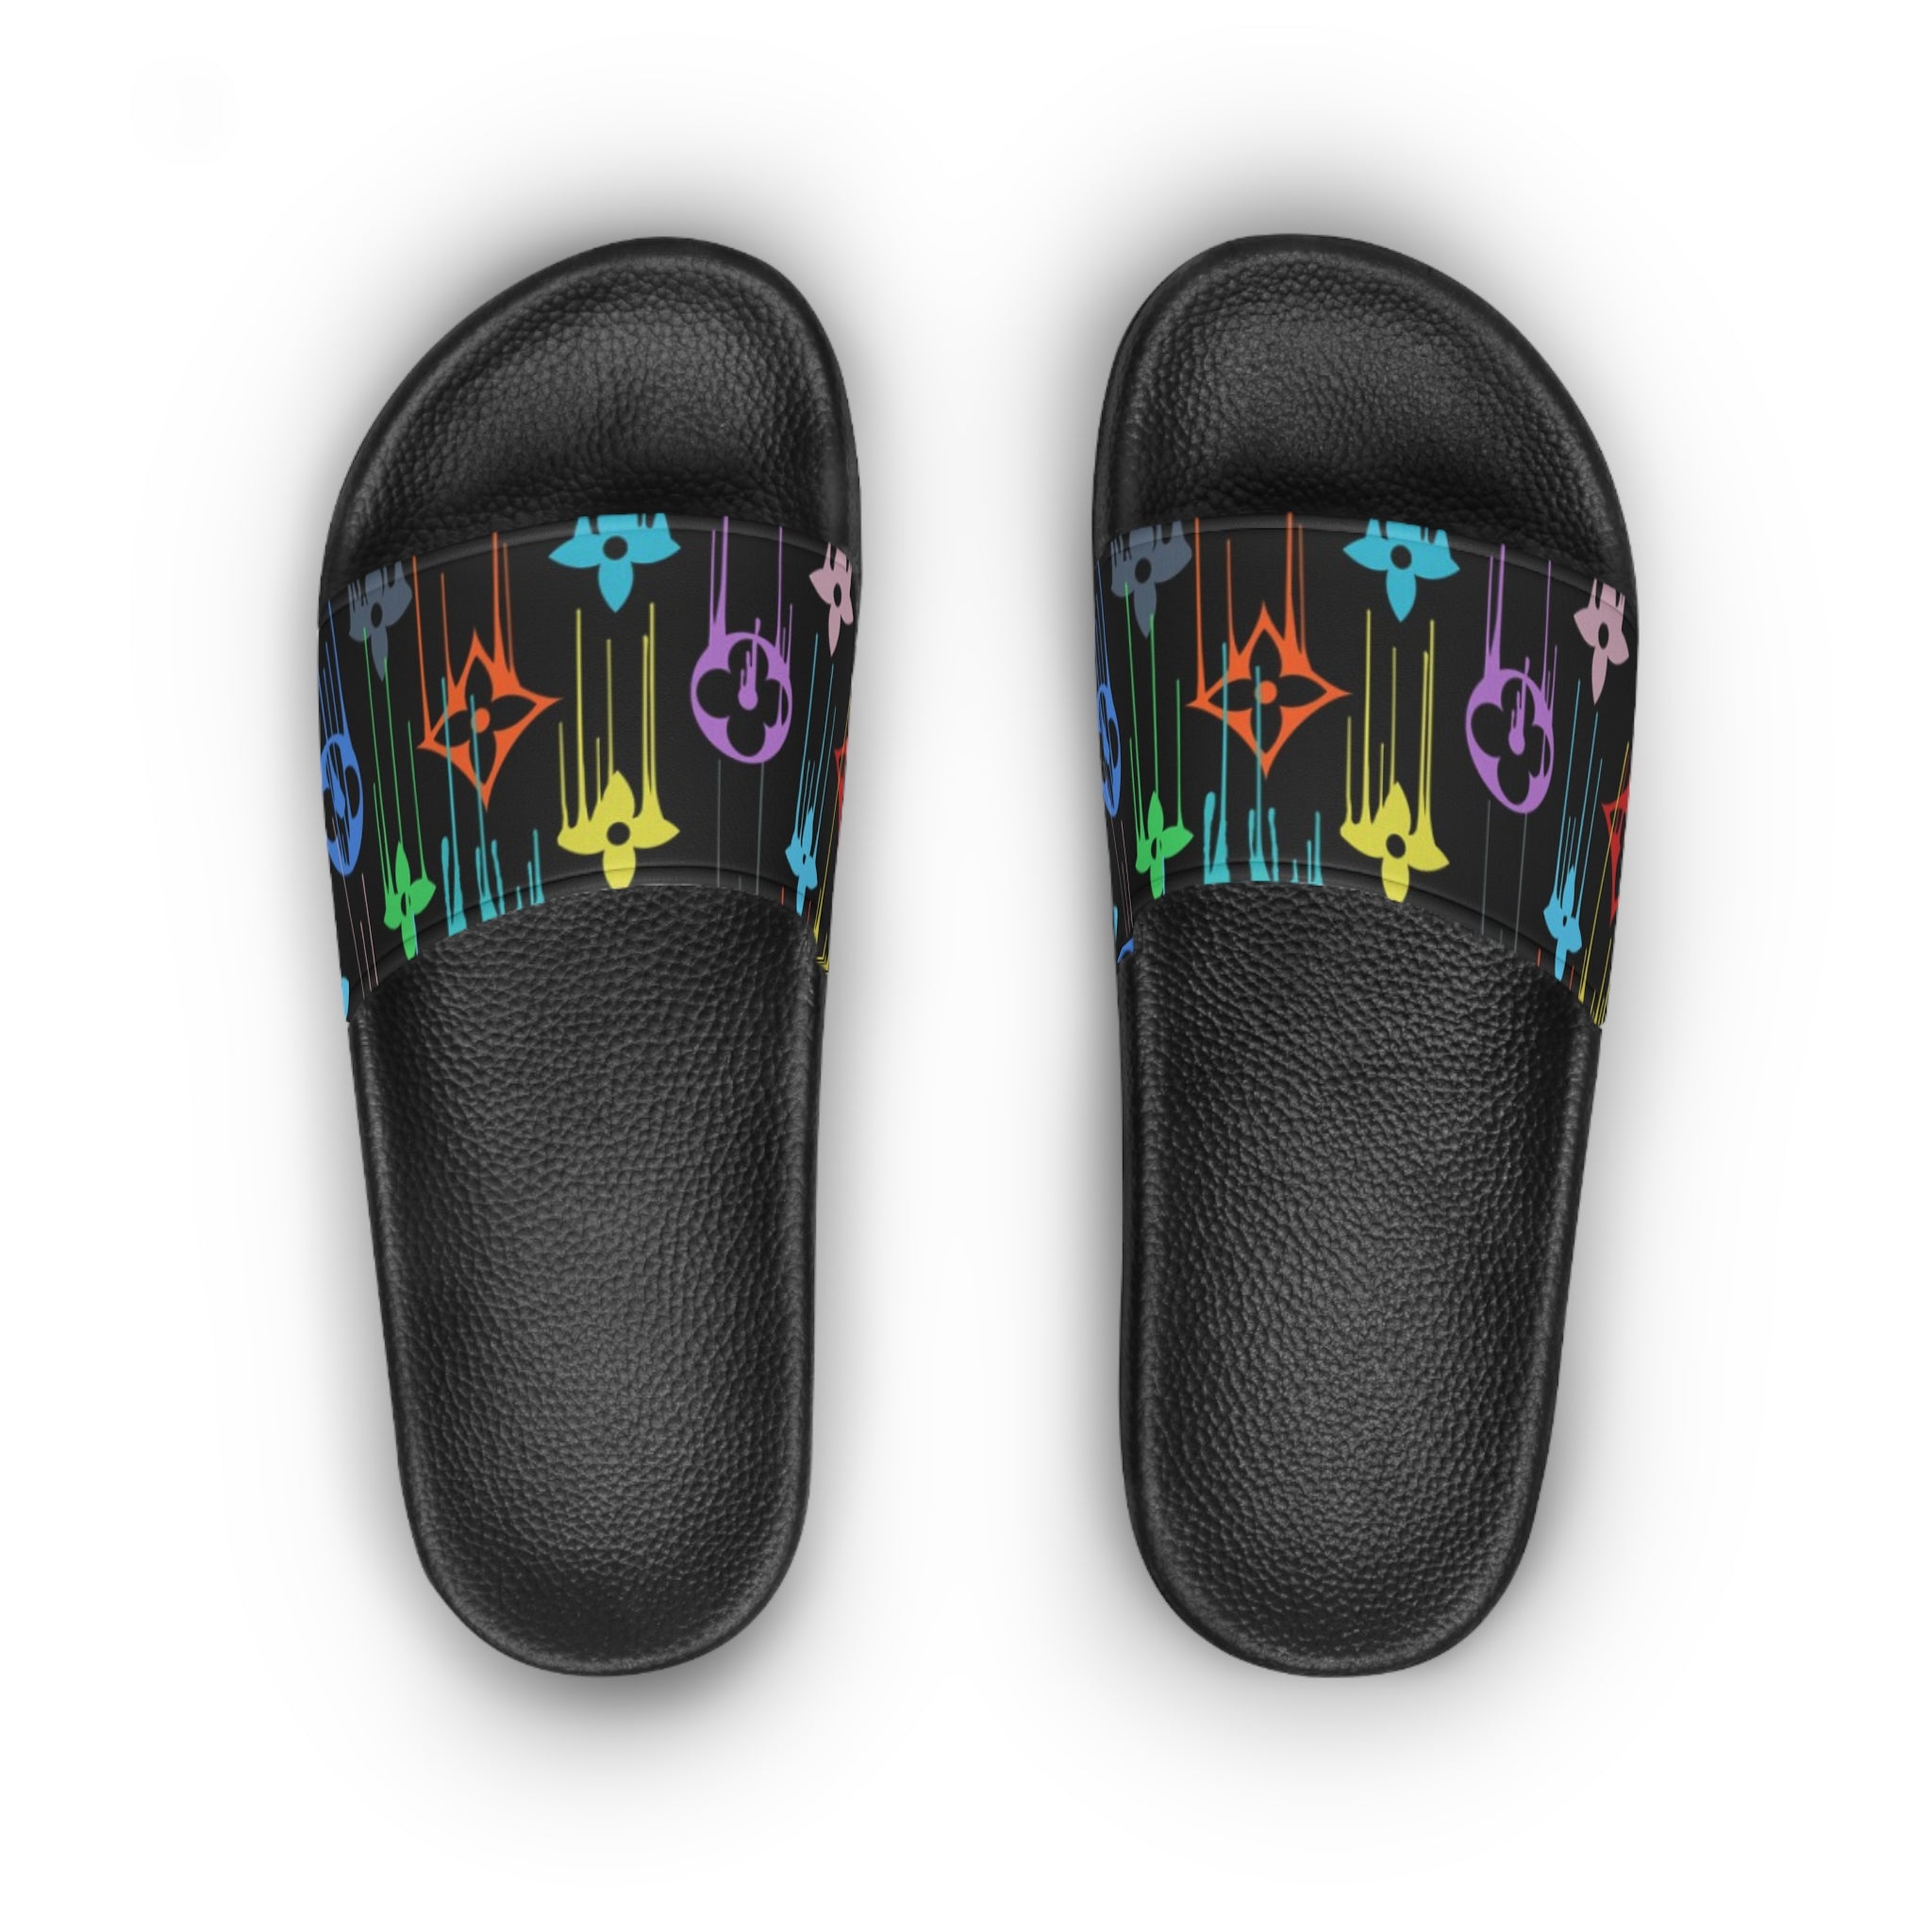  Casual Wear Collection in Multi-Color Dripping Icons Women's Slide Sandals, Slide Sandals for Women, Plaid Slip Ons SandalsBlacksoleUS12